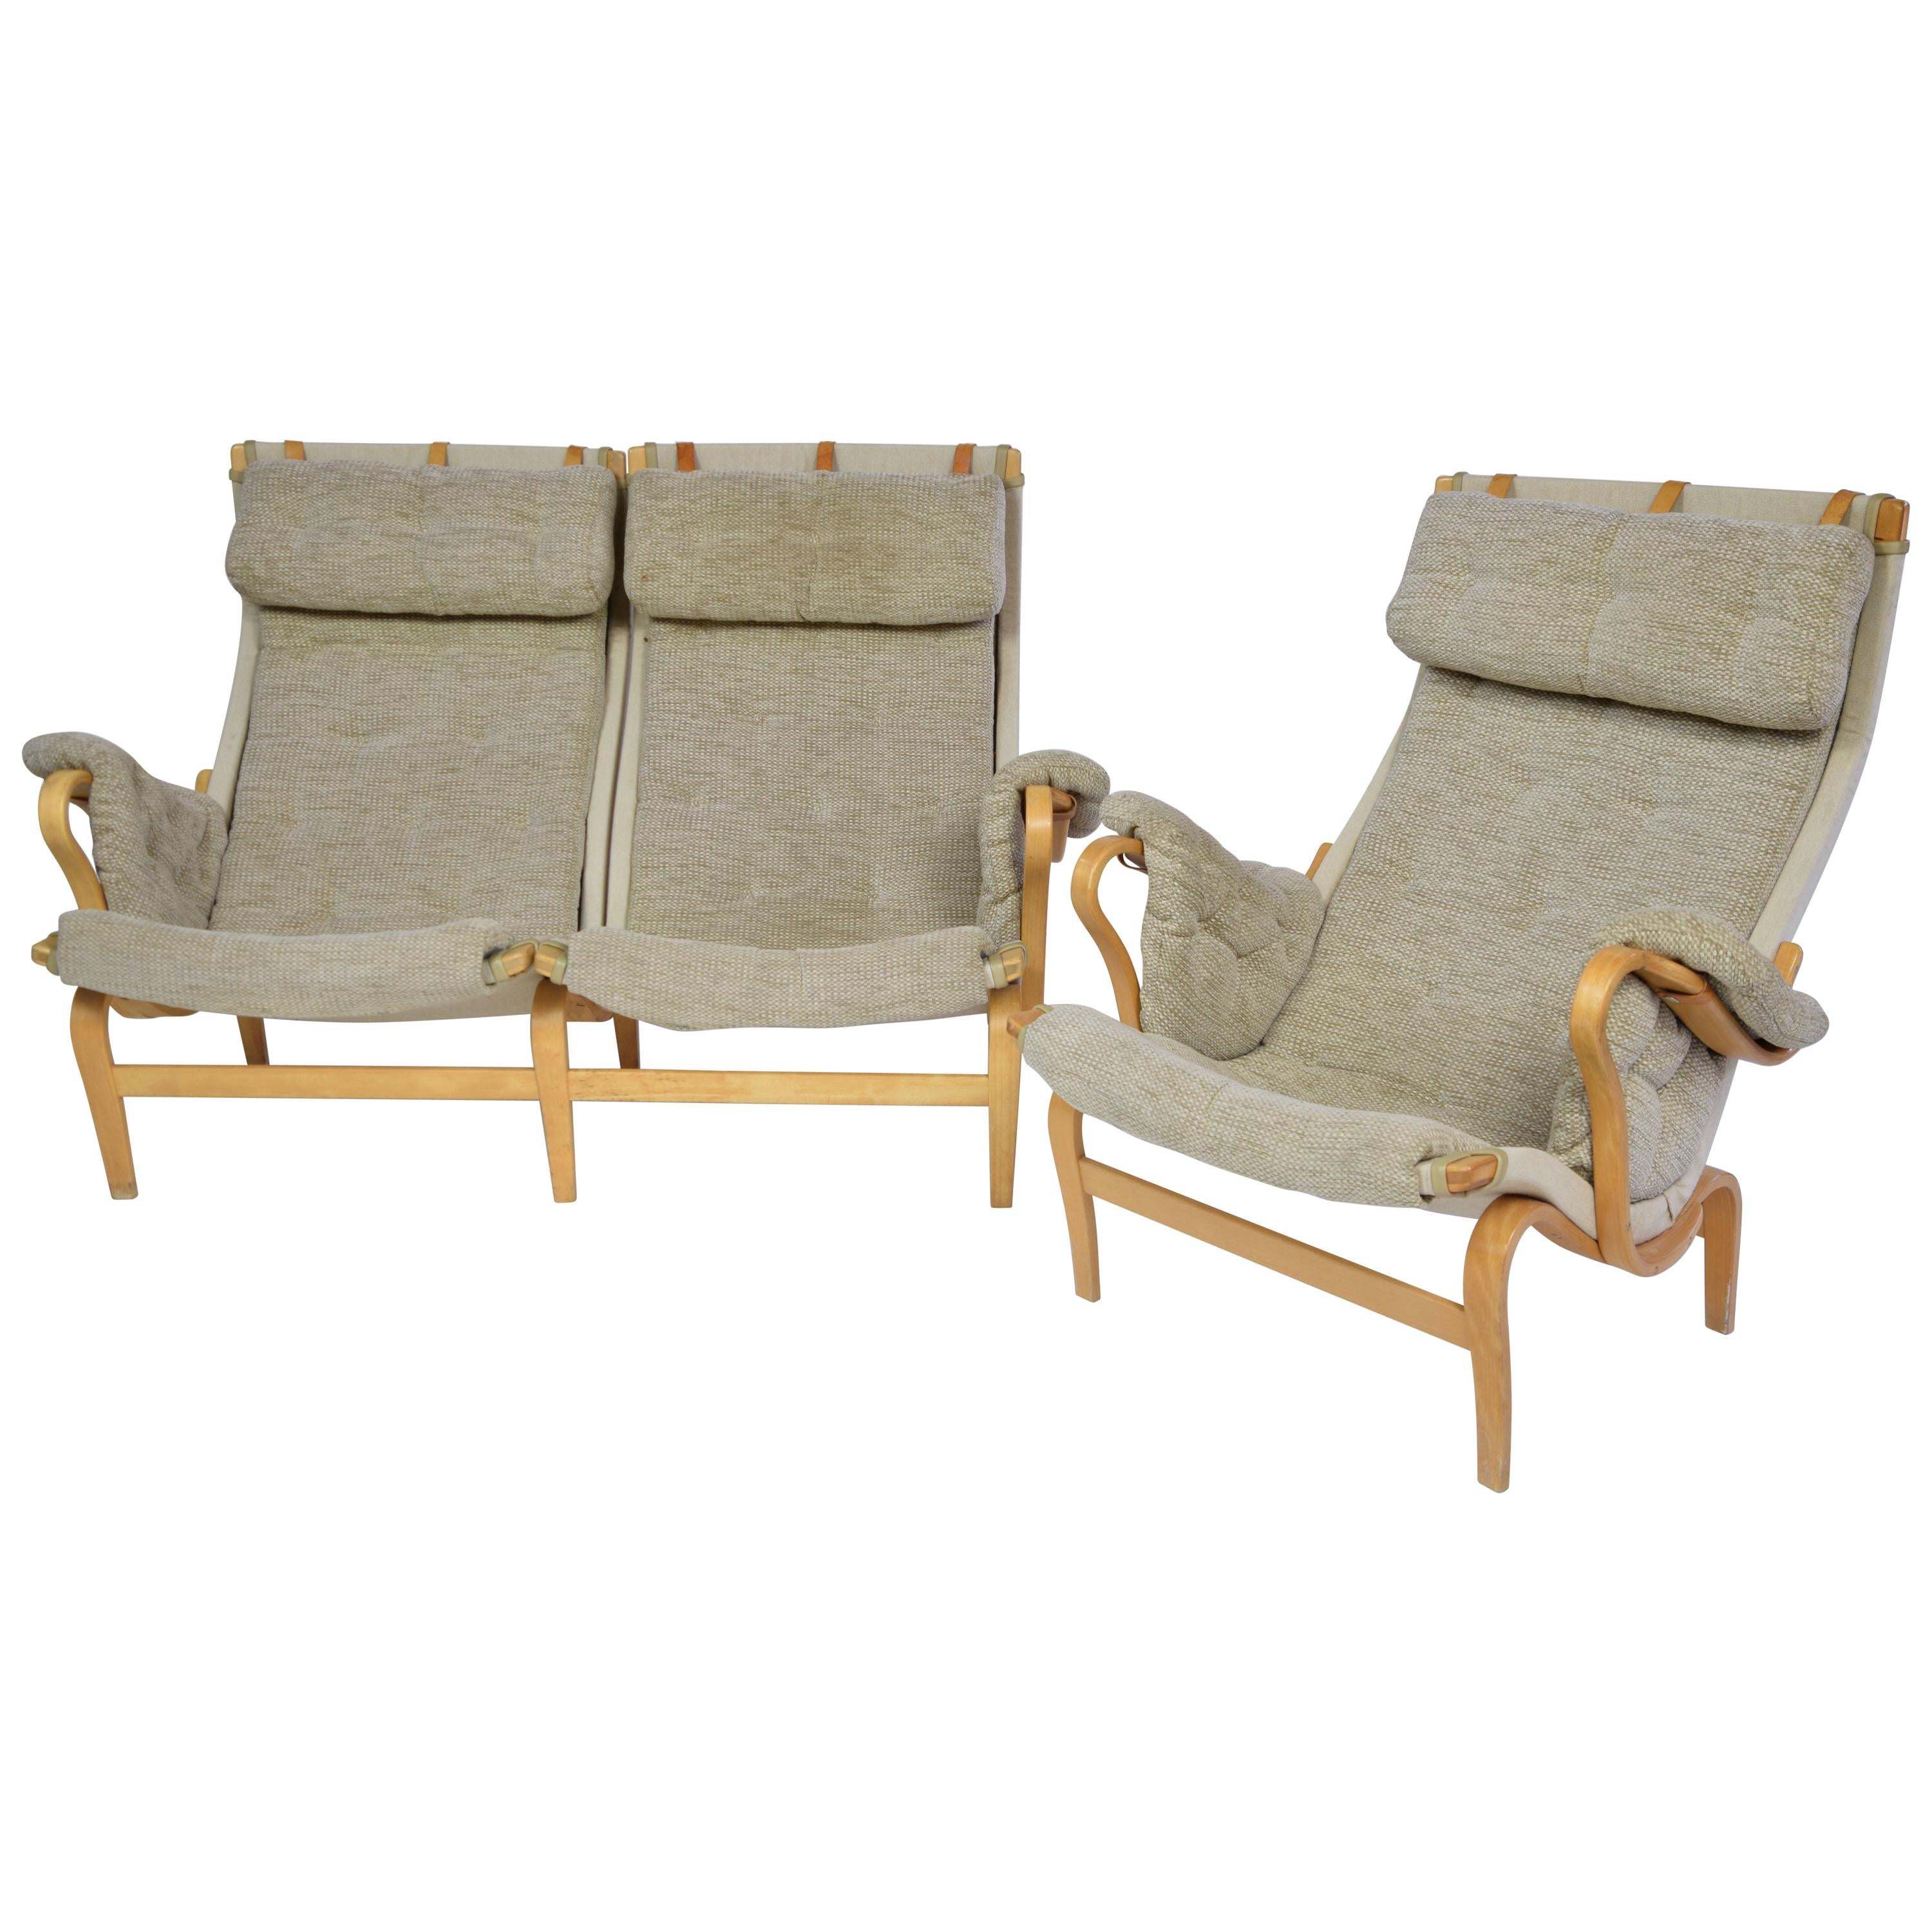 Bruno Mathssons Pernilla Settee with Matching Chair, Sweden, 1970s For Sale